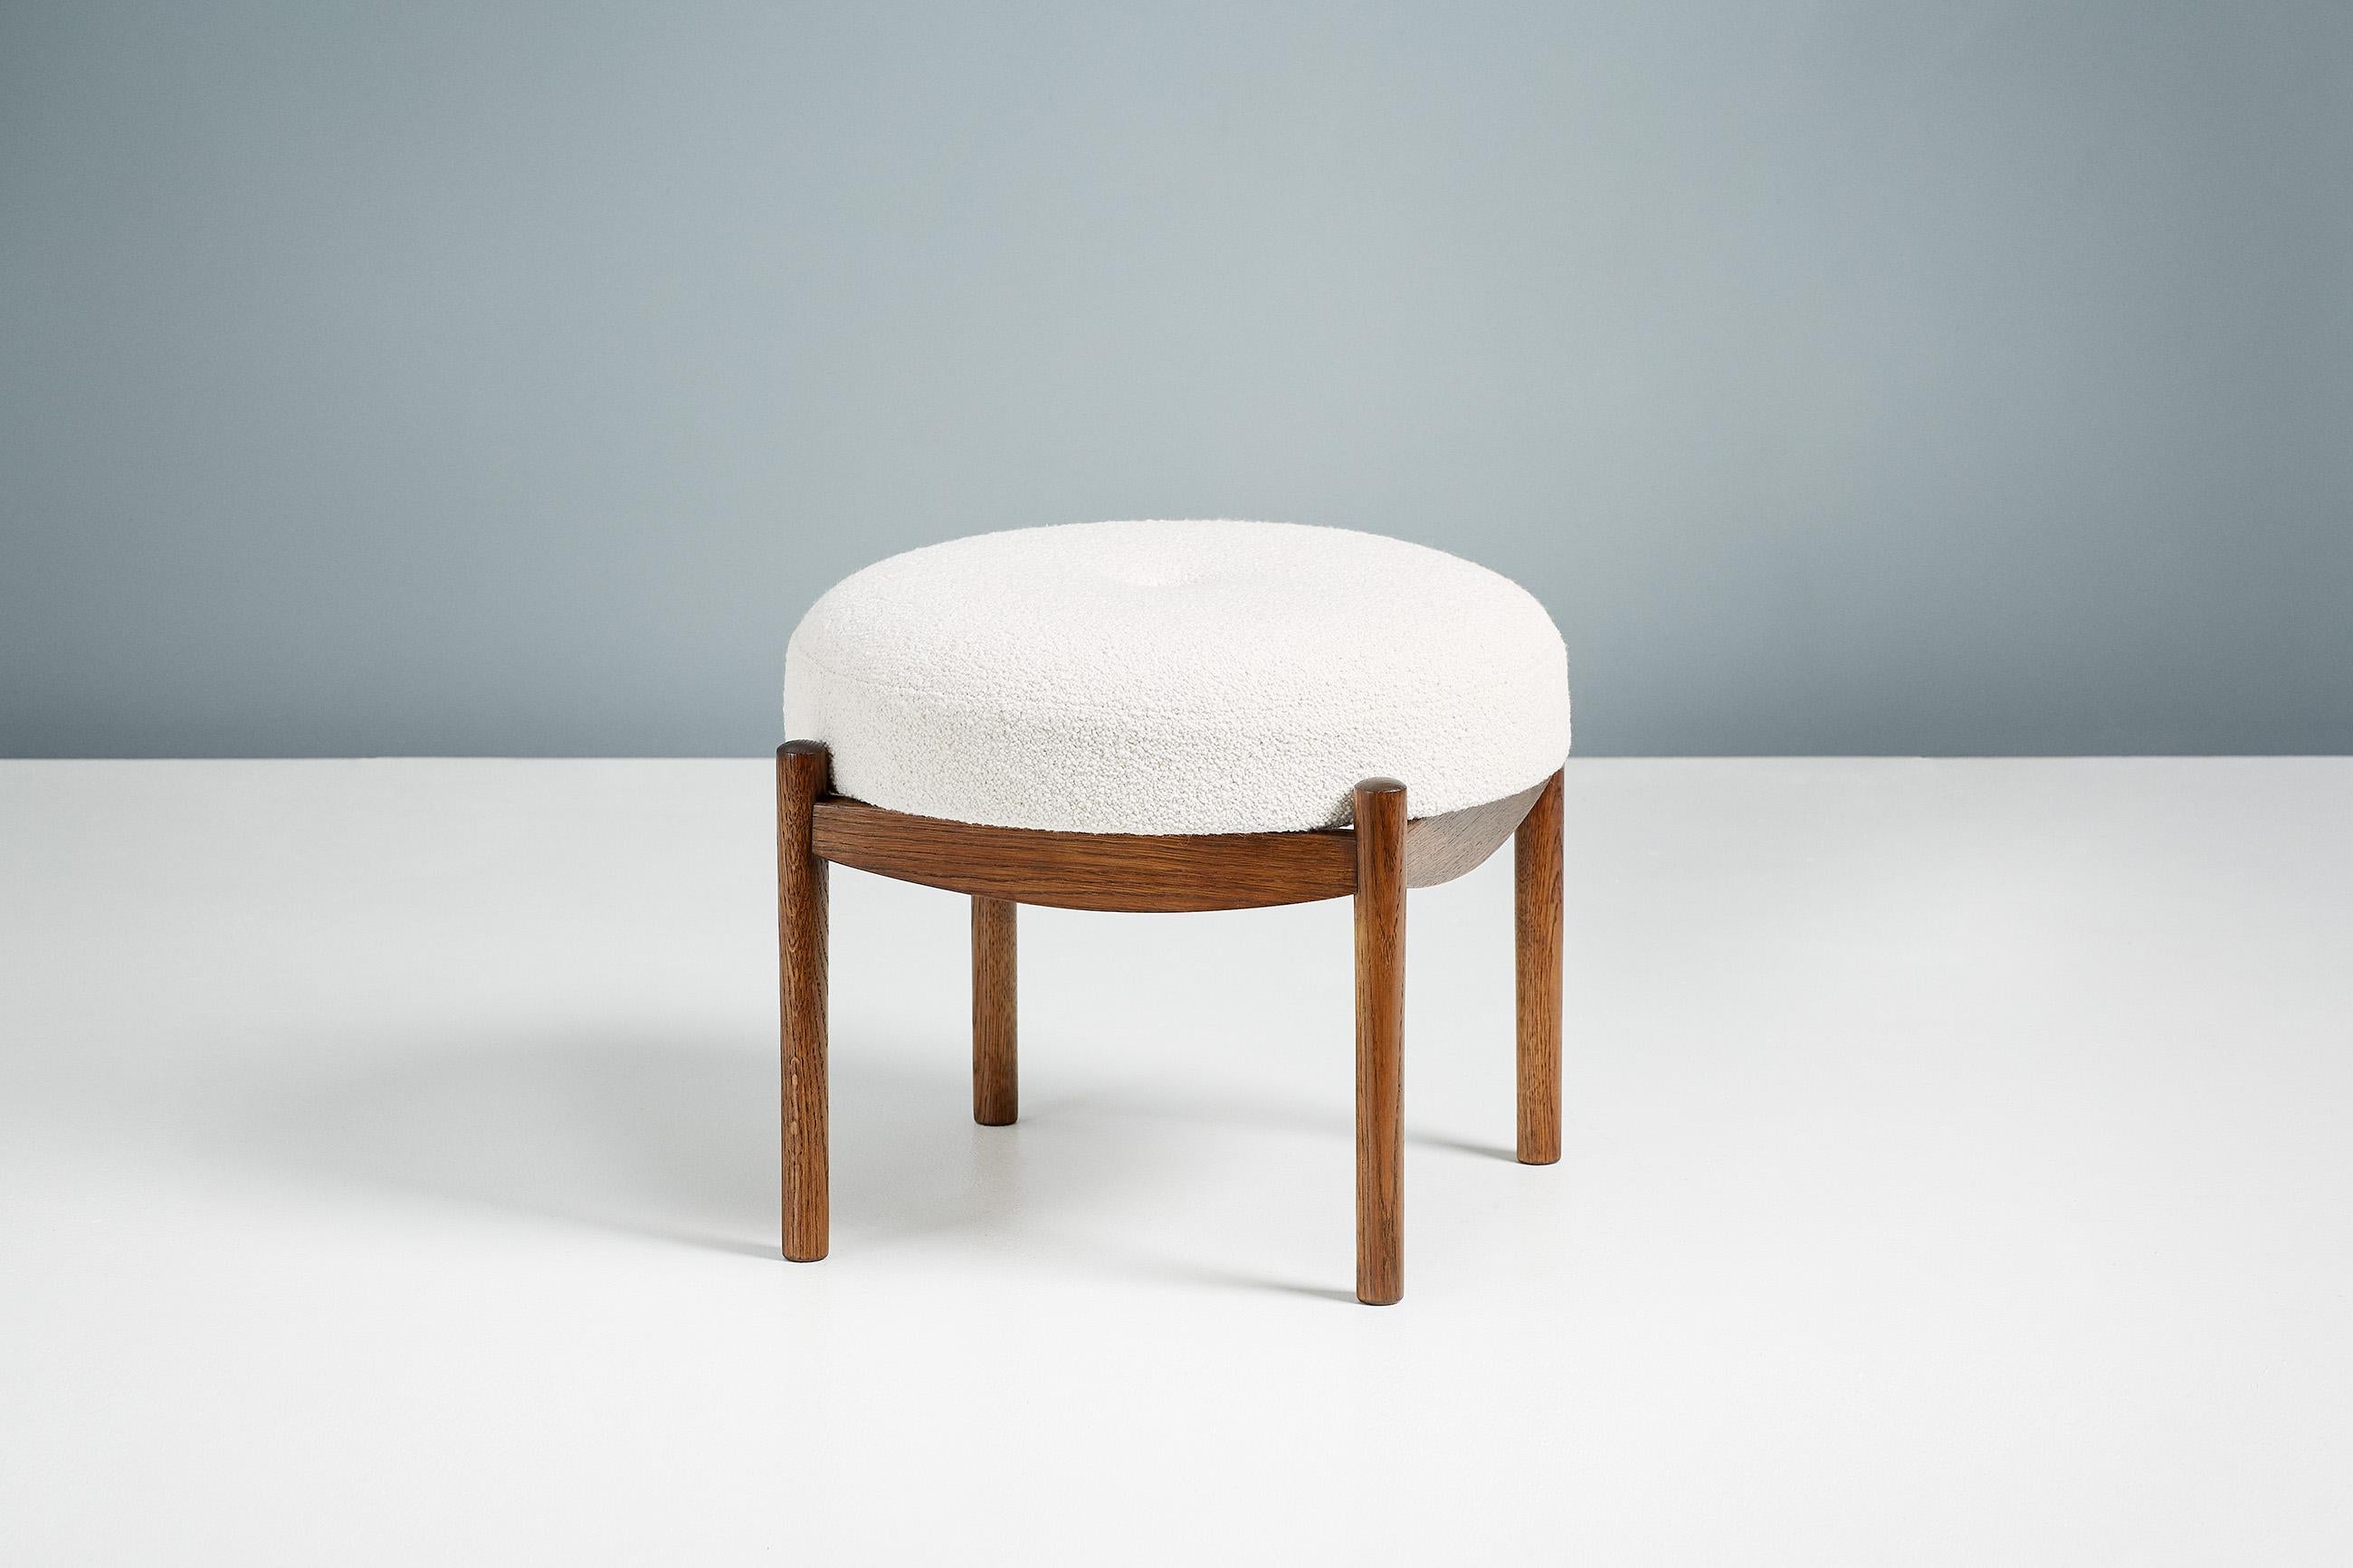 Dagmar Design

Blek Ottoman

A custom-made round ottoman with solid wood frame developed & produced at our workshops in London. These examples have frames in fumed oak with seats upholstered in off-white boucle. 

Blek is available to order in